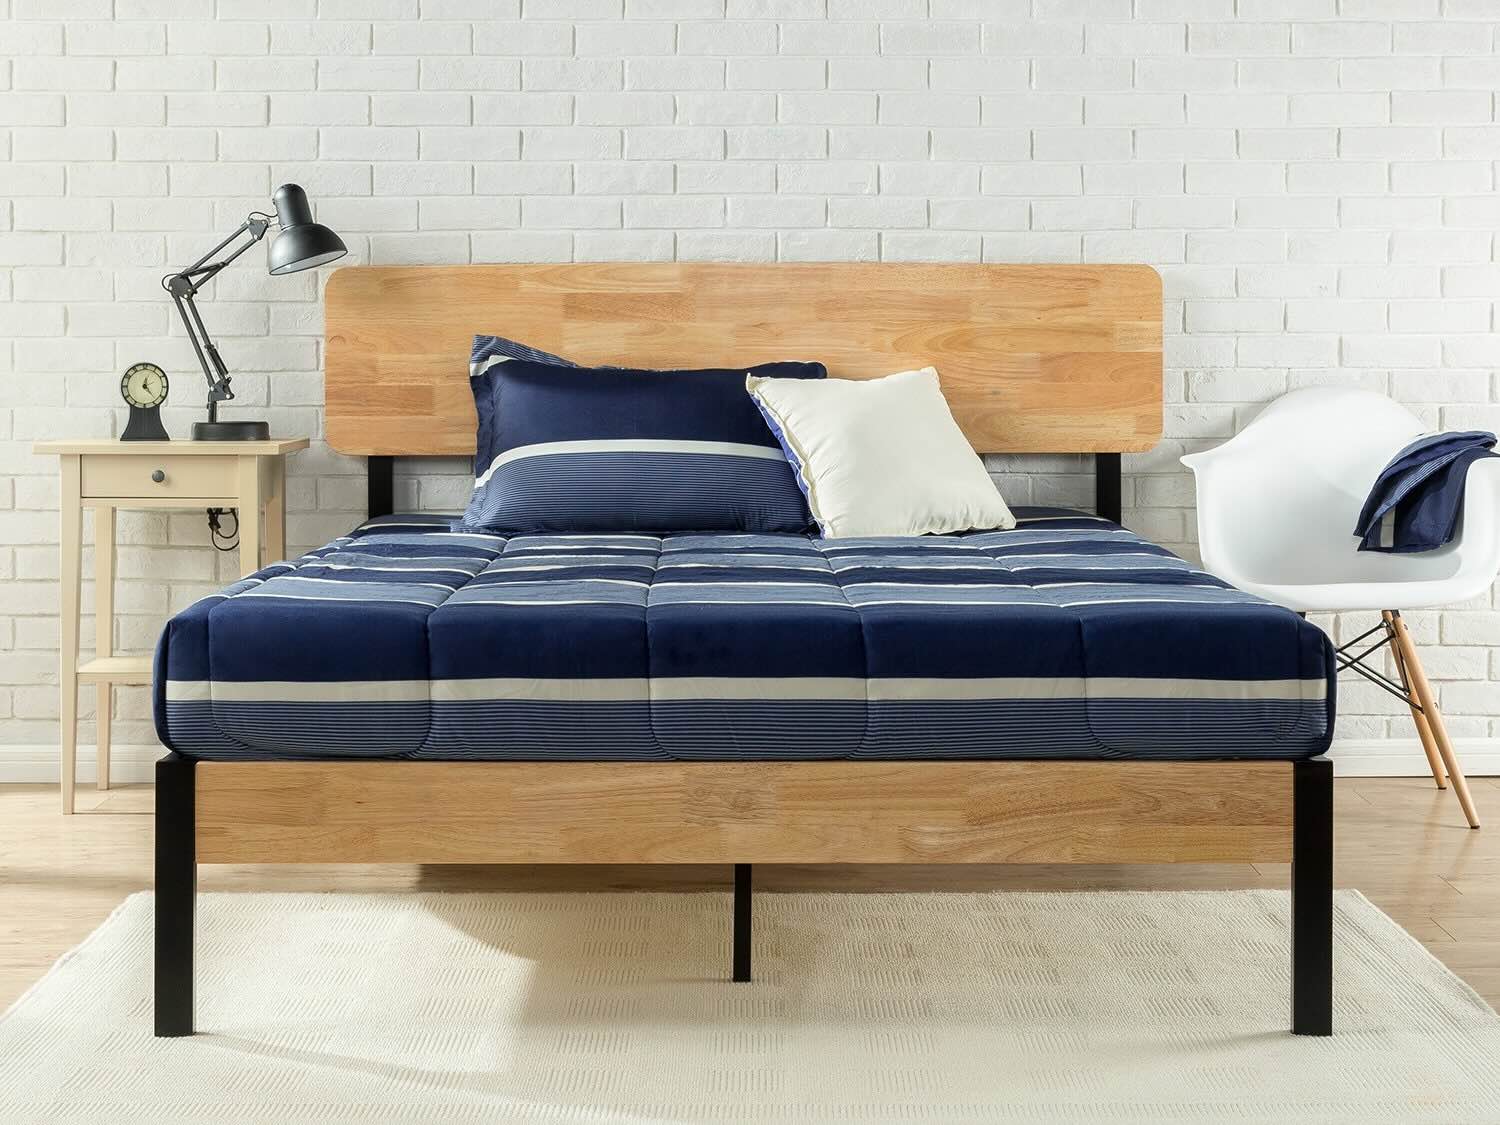 What Is The Best Material For A Bed Frame